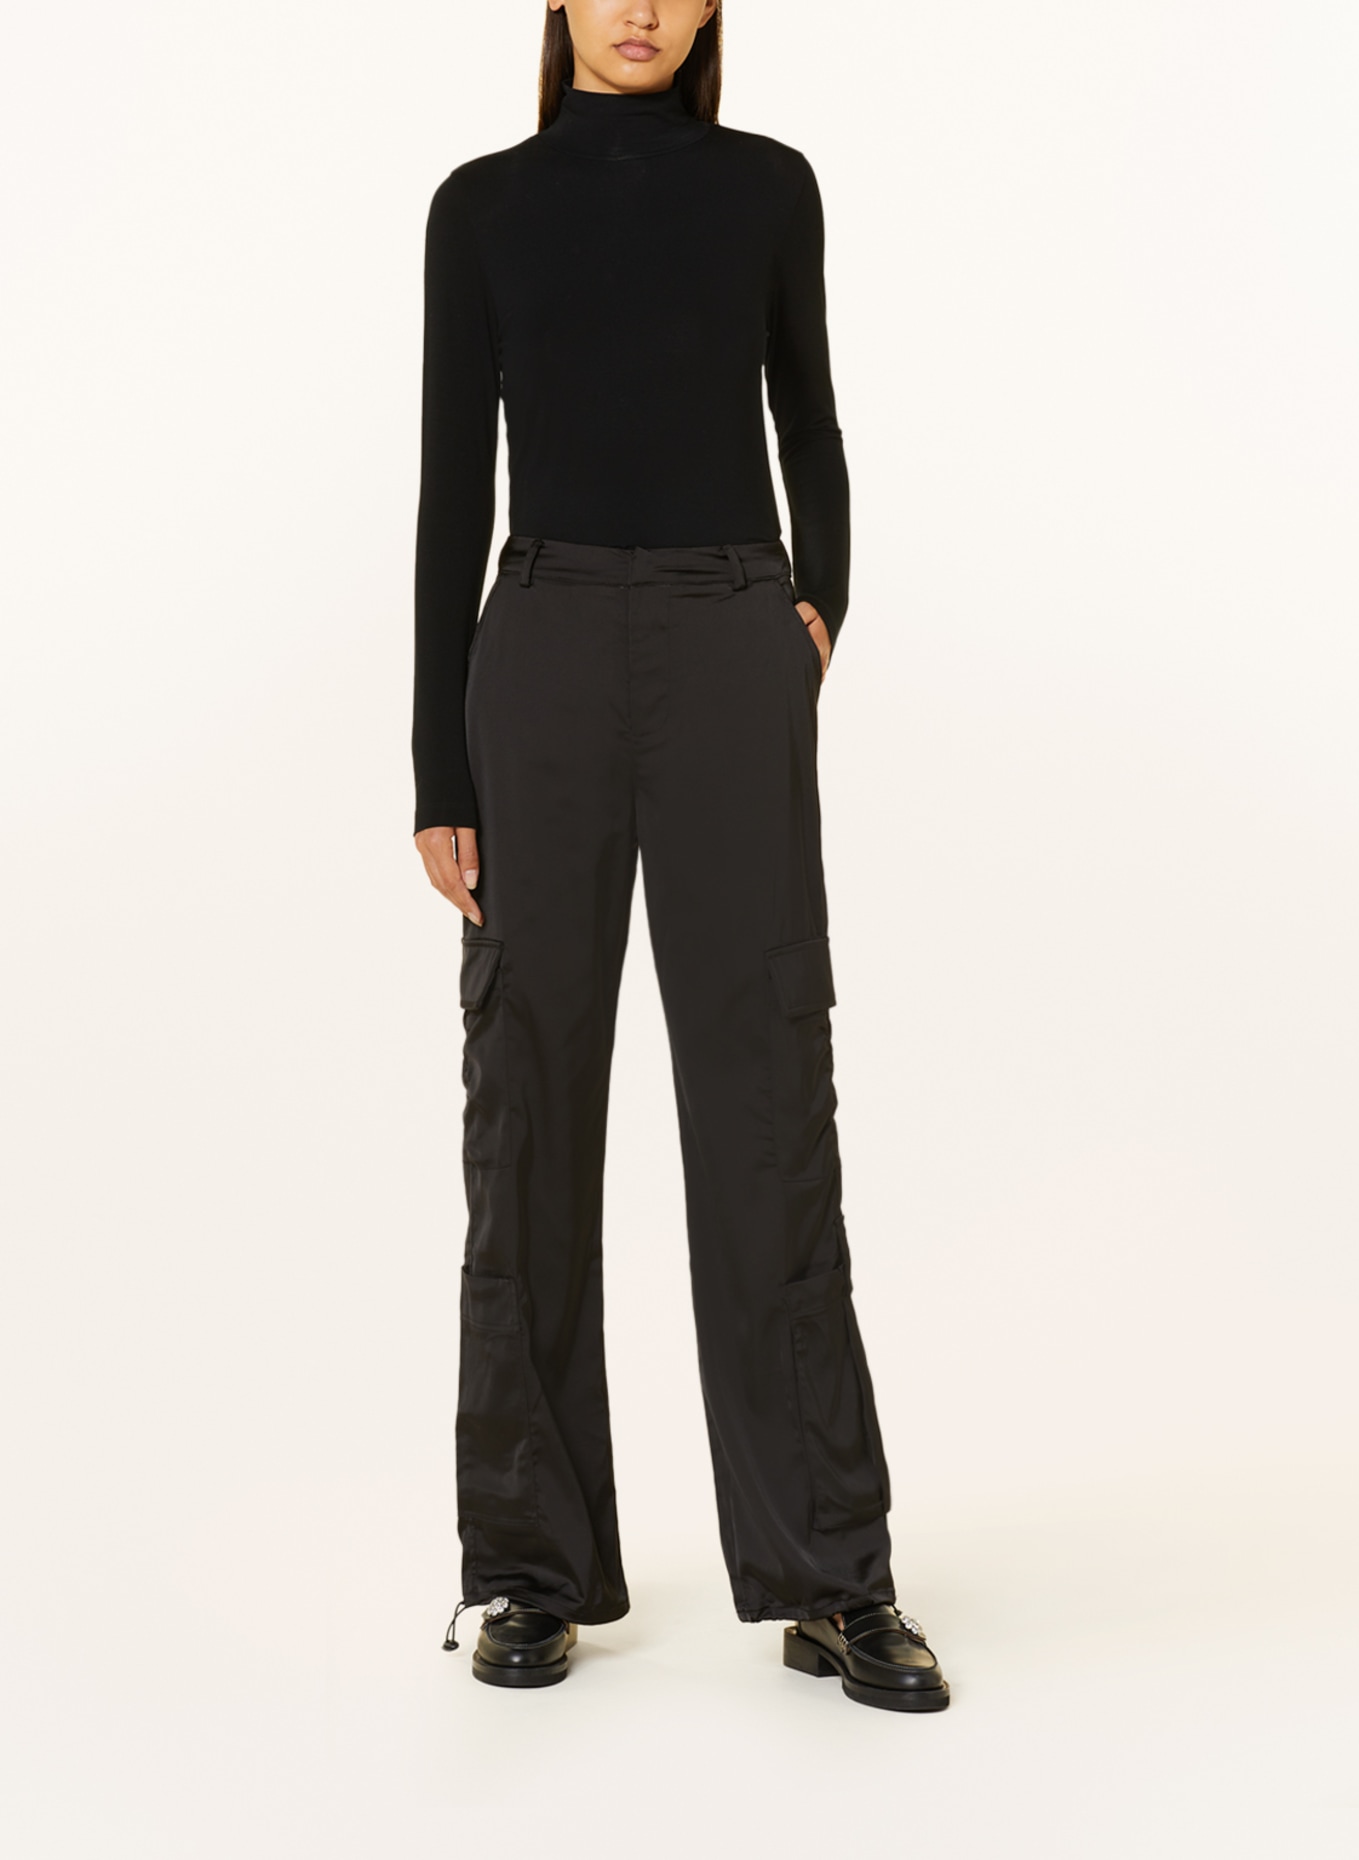 COLOURFUL REBEL Cargo pants MOIRA made of satin, Color: BLACK (Image 2)